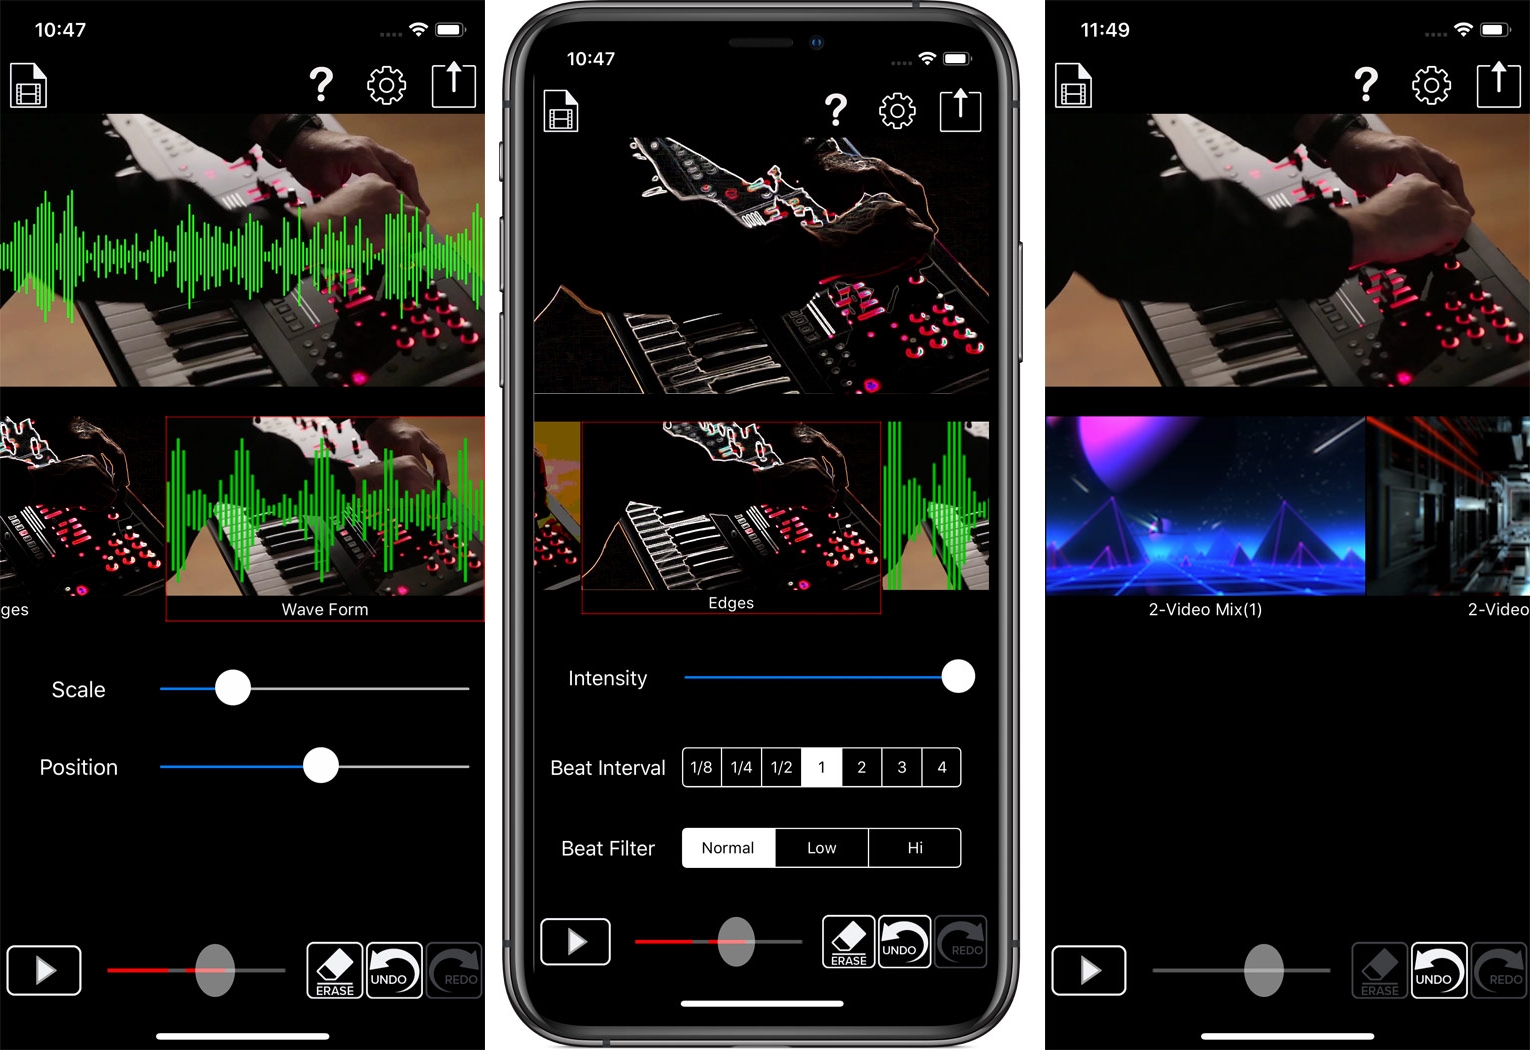 Liven up your DJ sets with visuals from Roland’s new free app